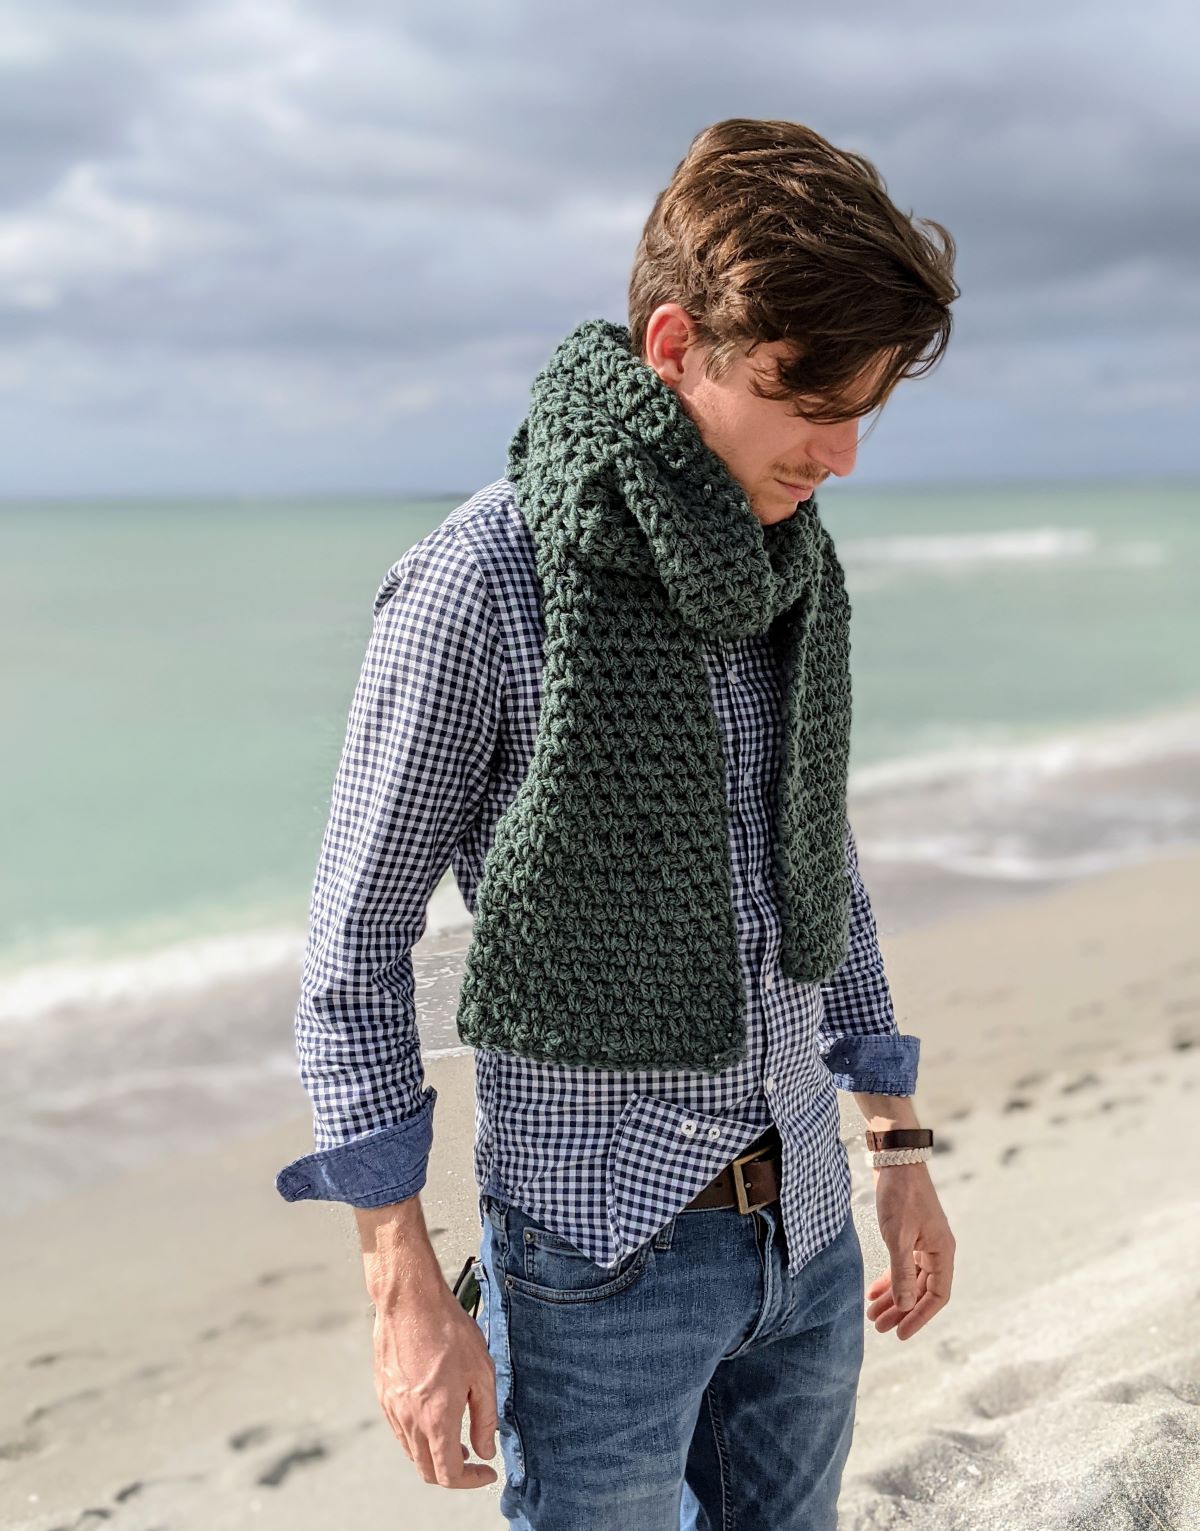 model is wearing a classic ribbed crochet scarf that is made with the granite stitch